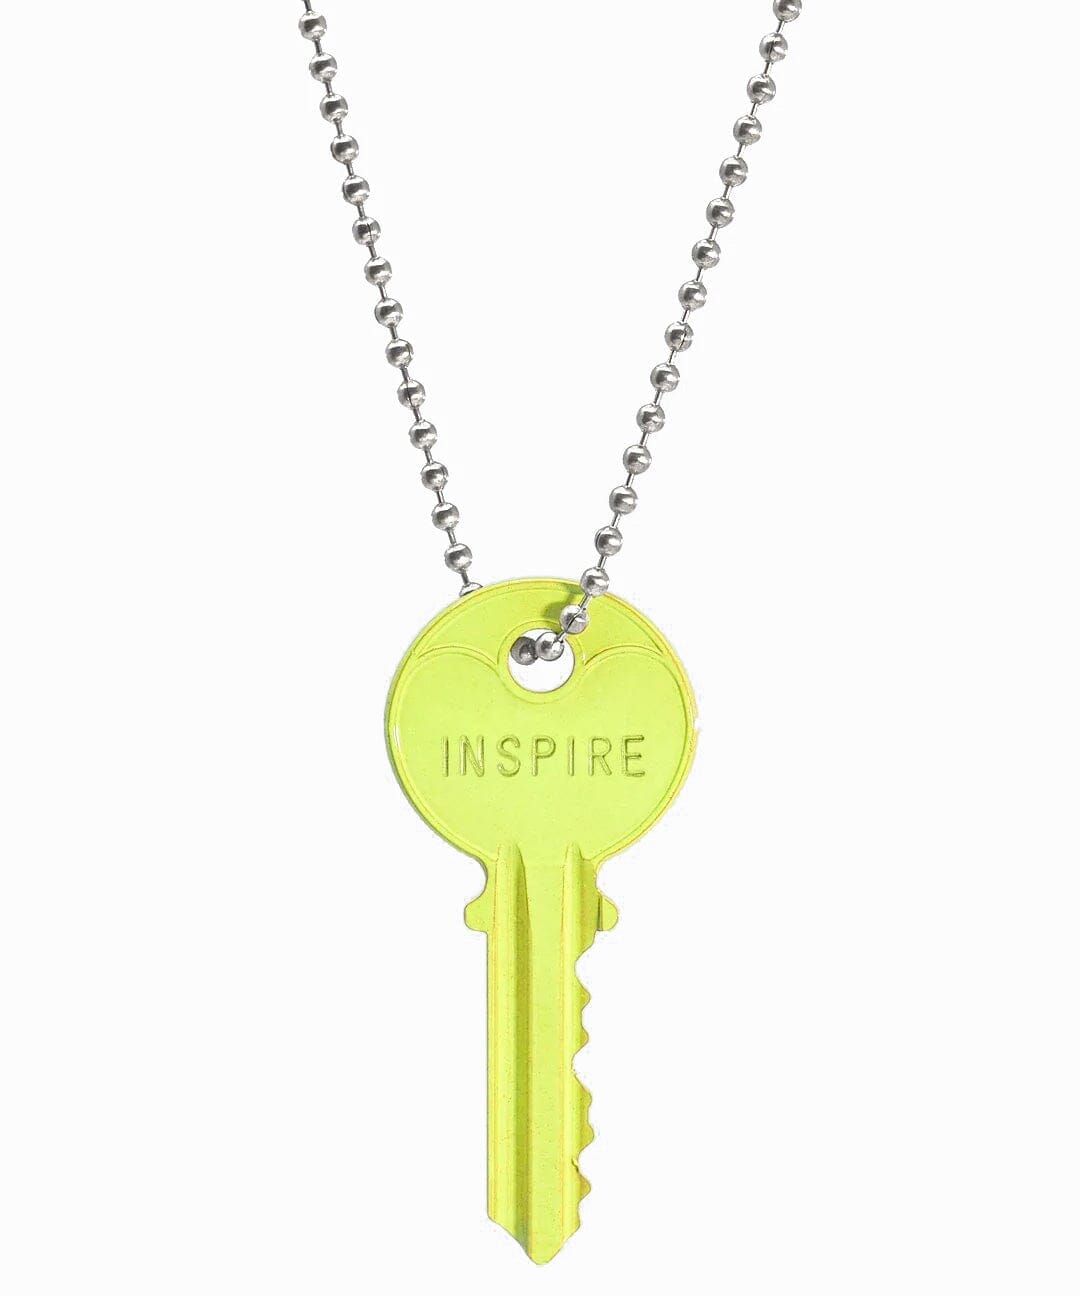 N - Neon Yellow Classic Ball Chain Key Necklace Necklaces The Giving Keys 